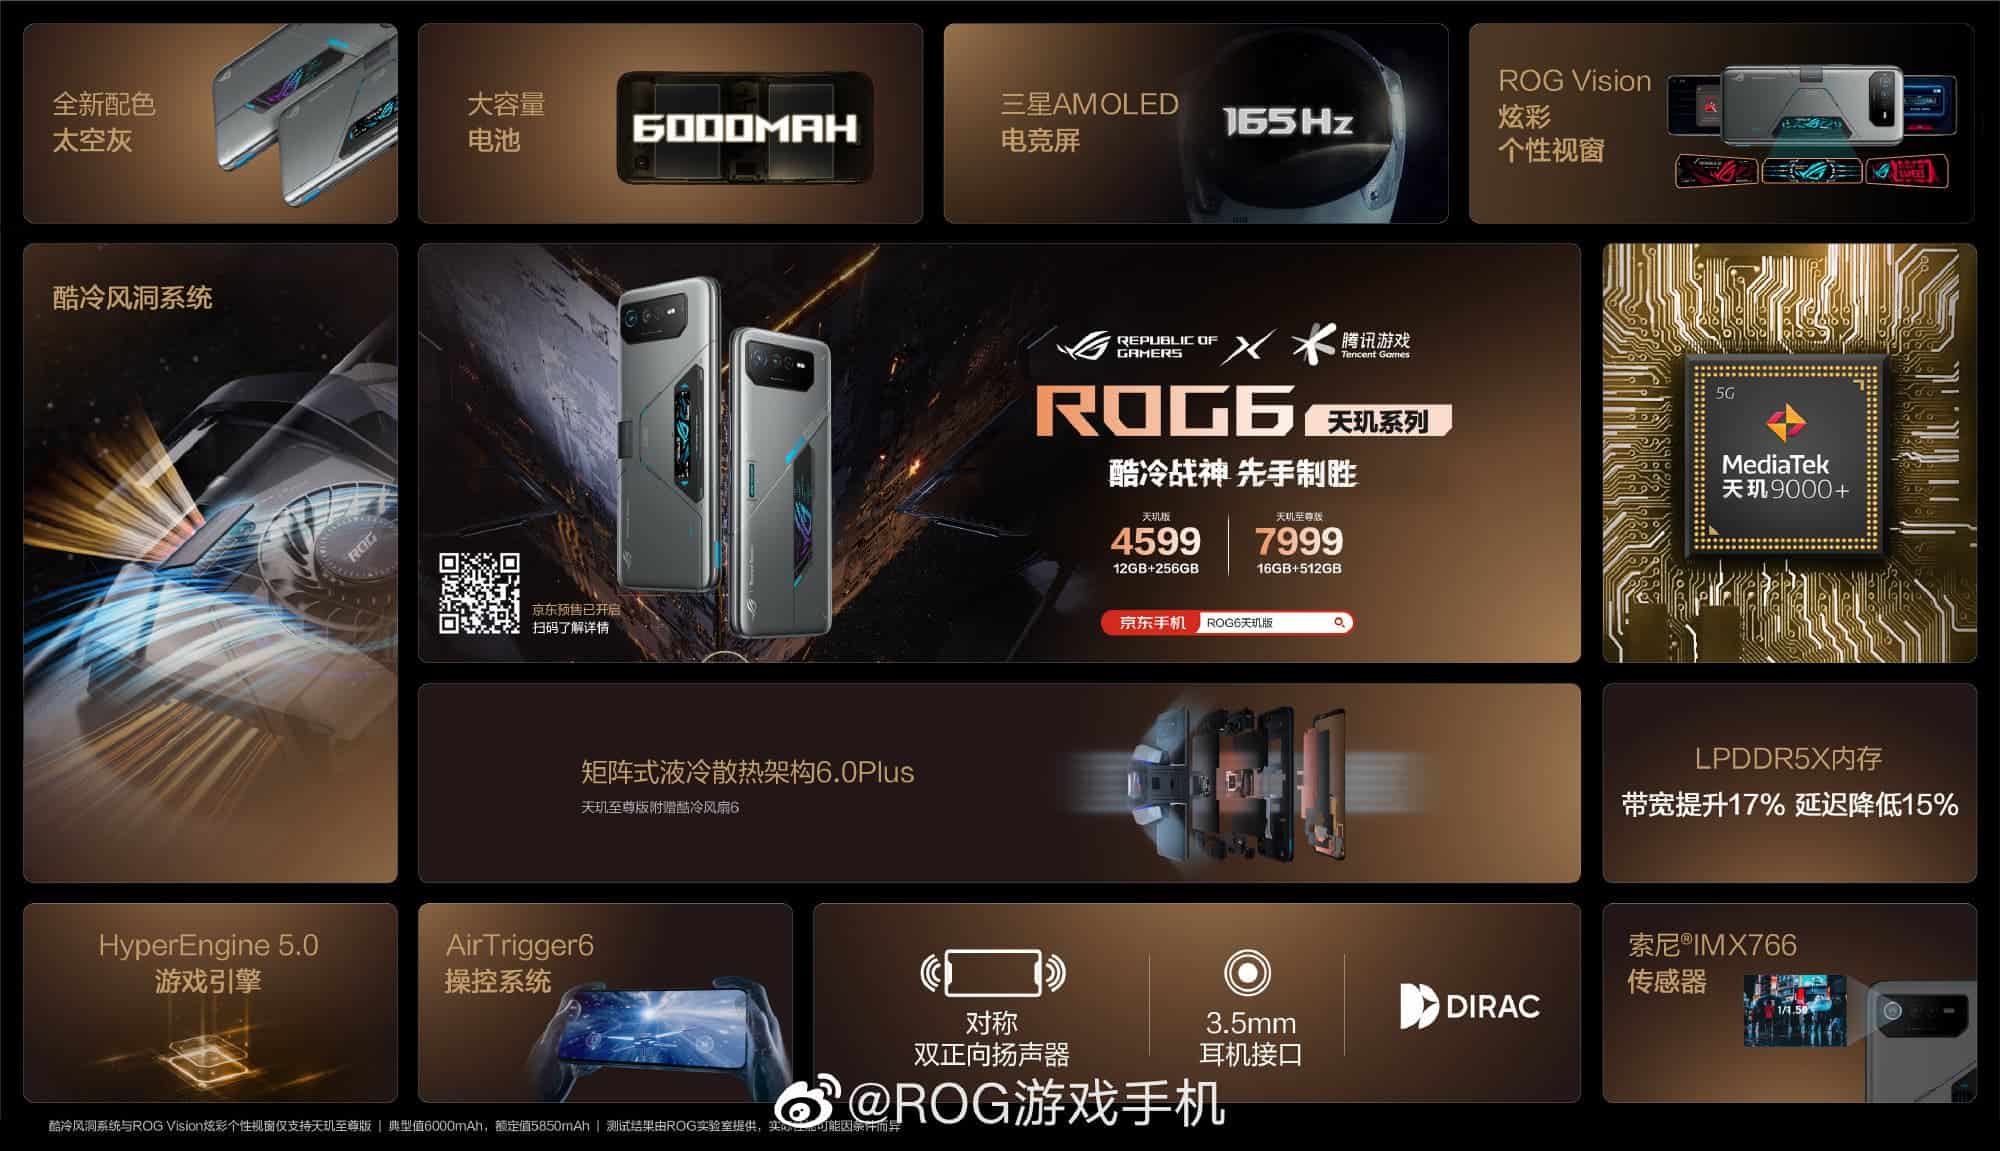 ASUS ROG 6D price and specs